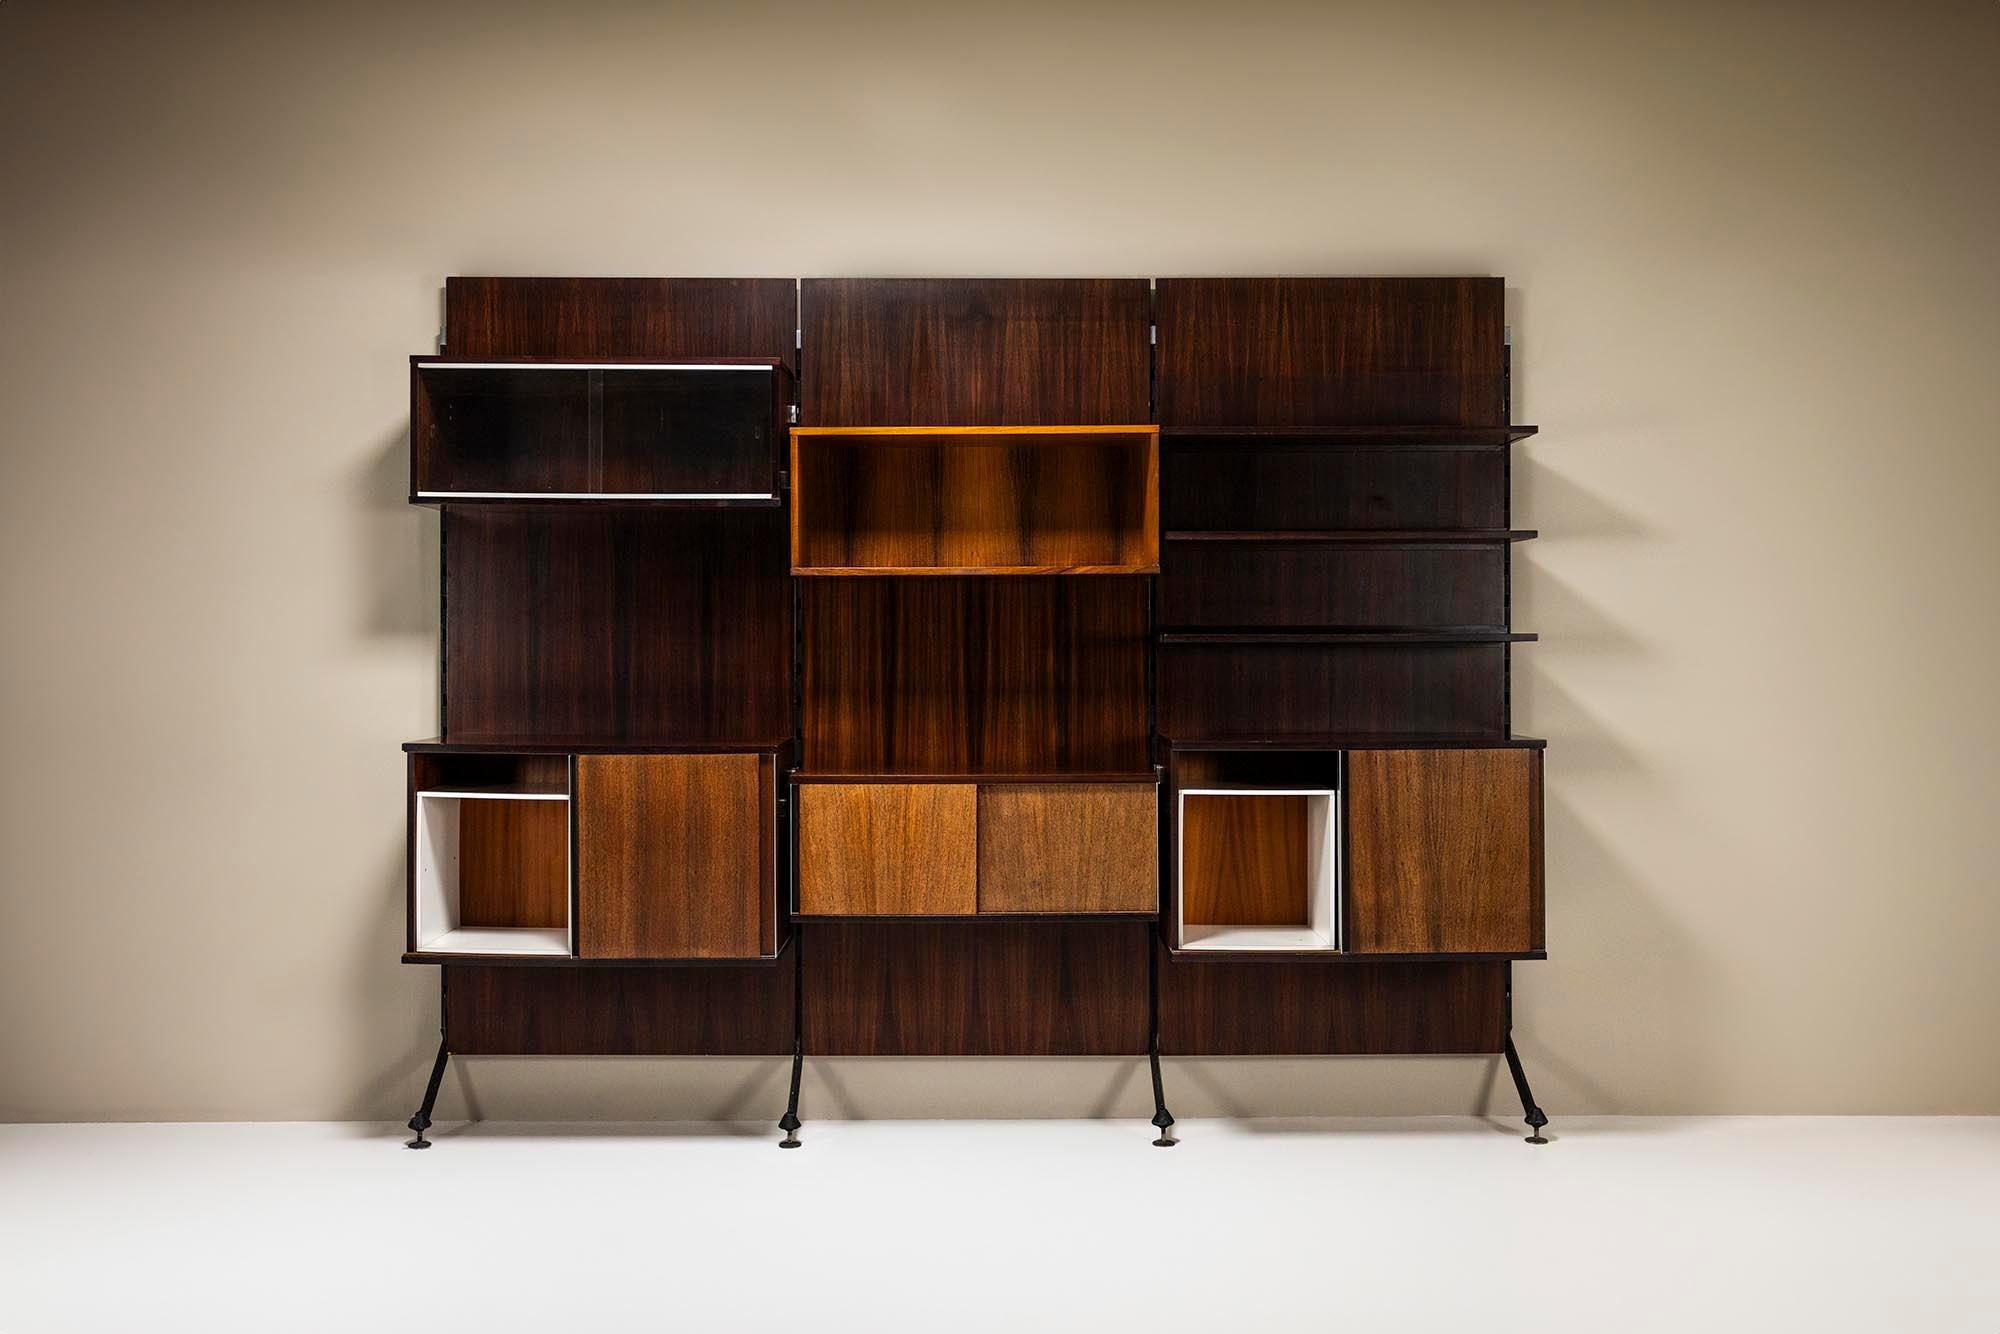 The Urio Wall System by Ico and Luisa Parisi for MIM Roma embodies the essence of Italian modernism. Crafted with exquisite rosewood panels, its sleek lines and minimalist design exude sophistication. The warm tones of the wood juxtaposed with the